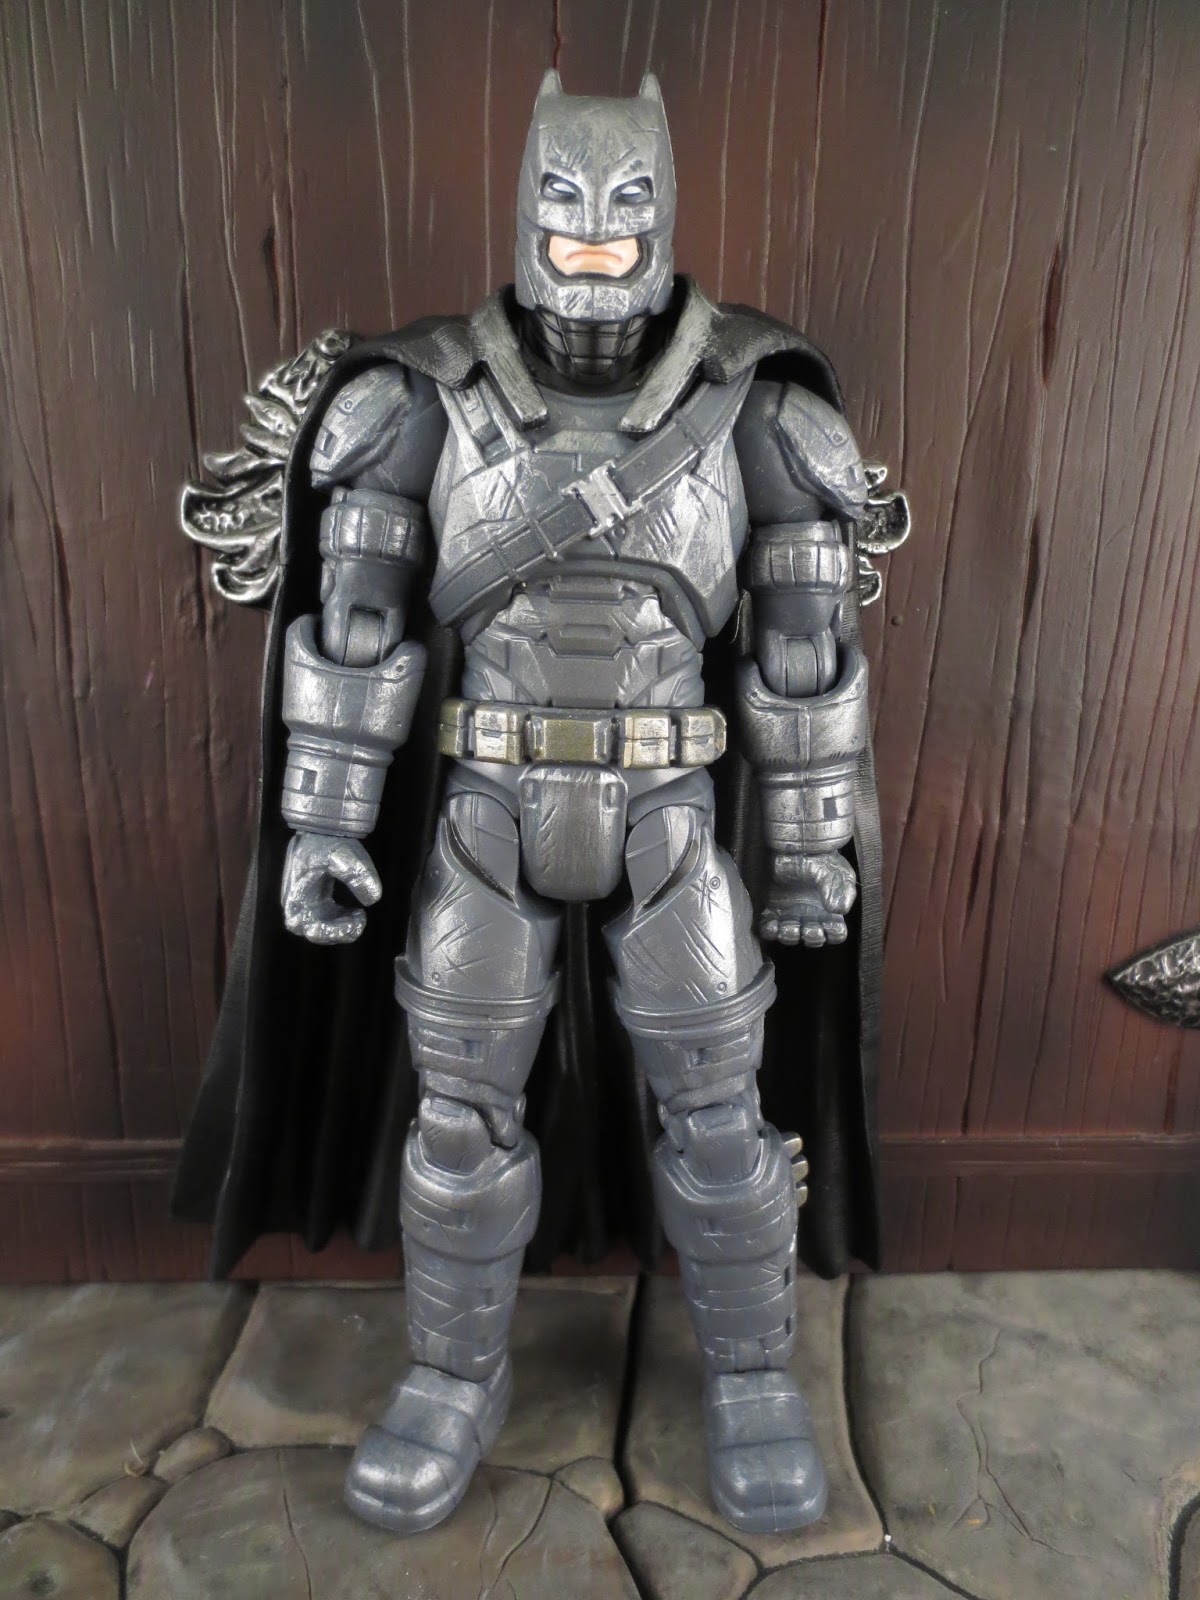 Action Figure Barbecue: Action Figure Review: Armored Batman from DC Comics  Multiverse: Batman v. Superman by Mattel